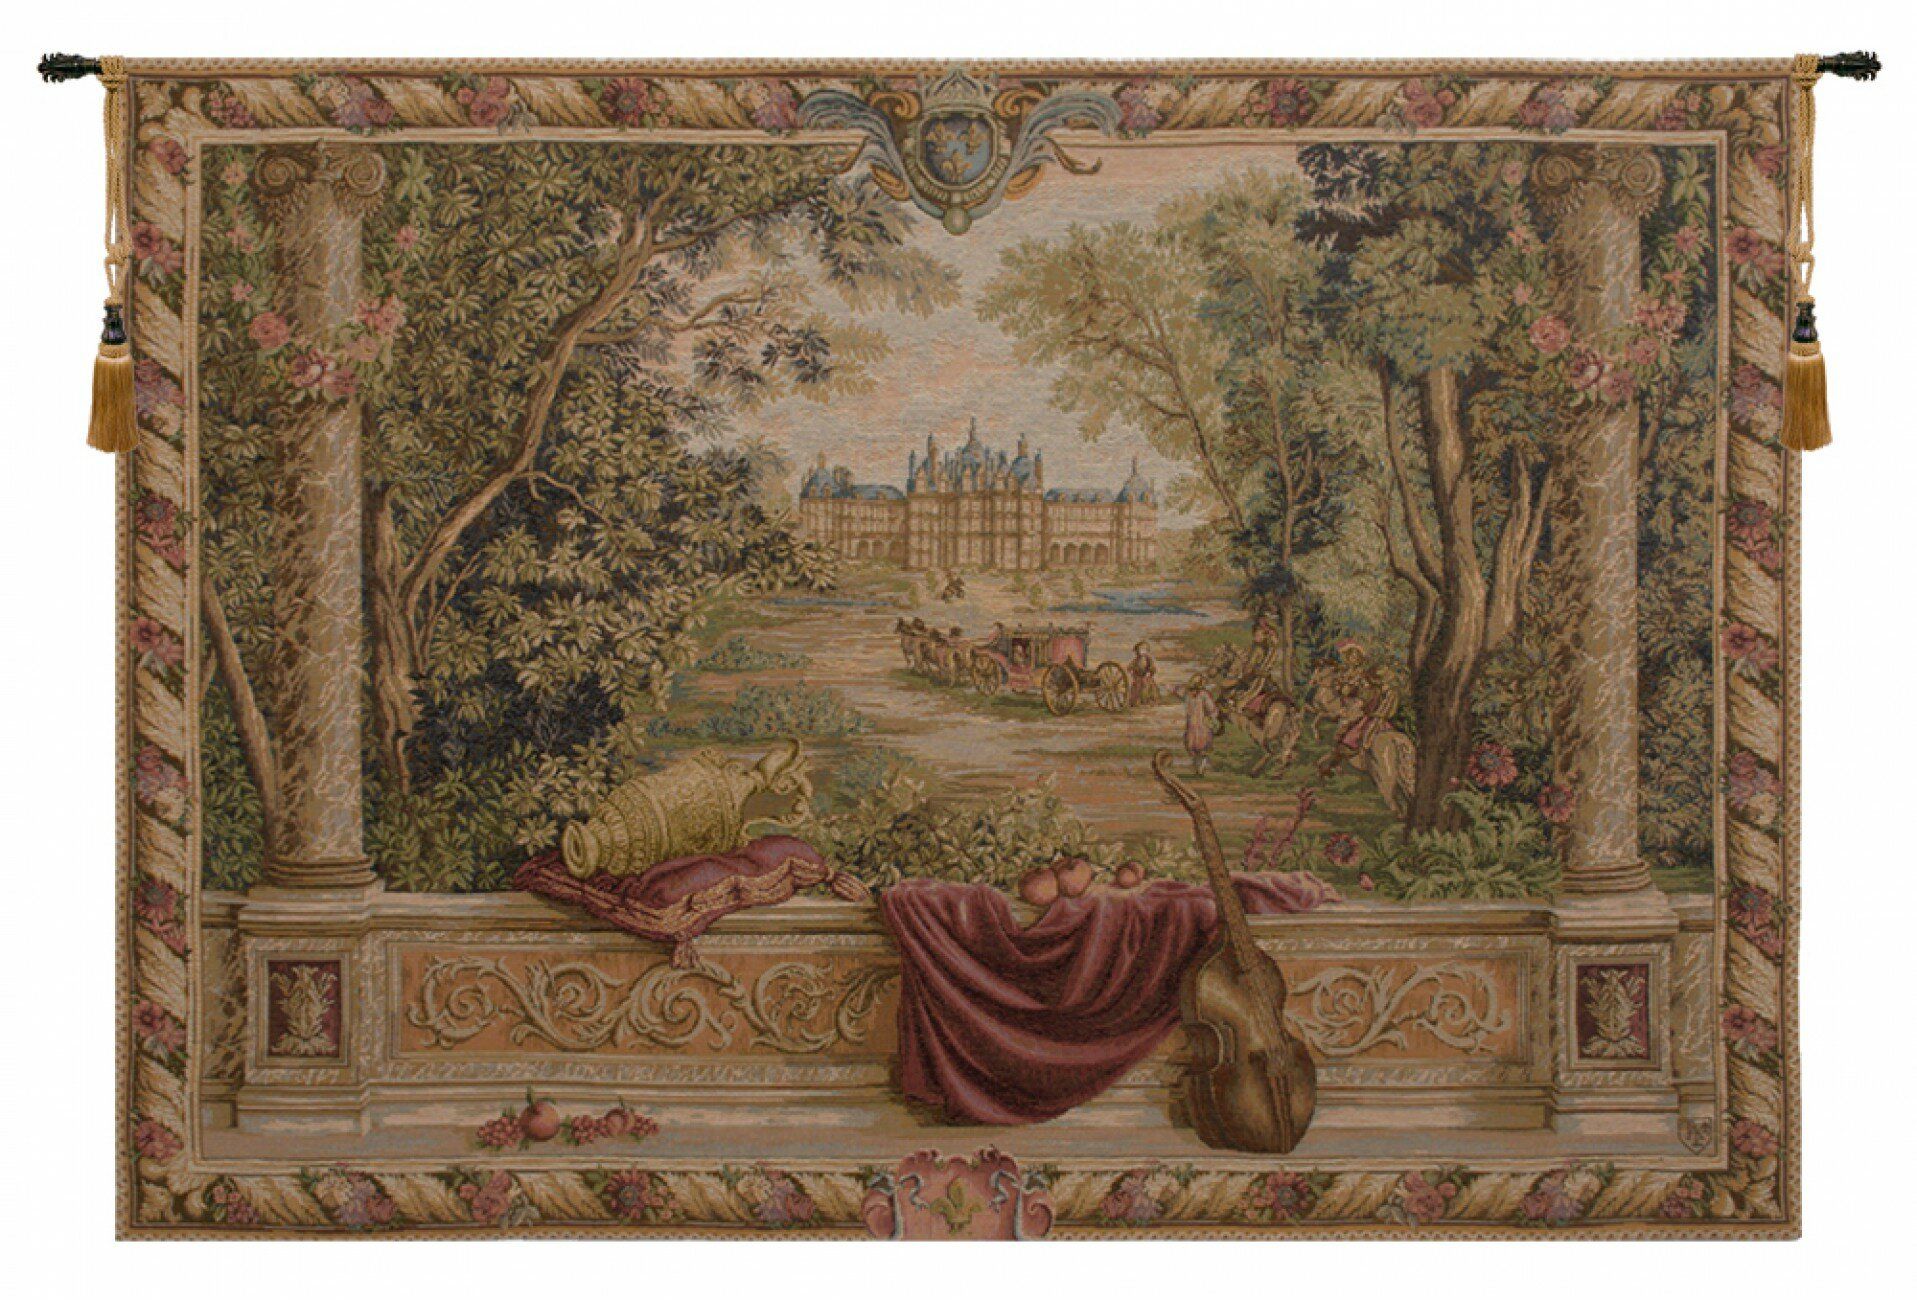 Verdure Au Chateau Ii European Tapestry Intended For Most Popular Blended Fabric Verdure Au Chateau Ii European Tapestries (View 1 of 20)